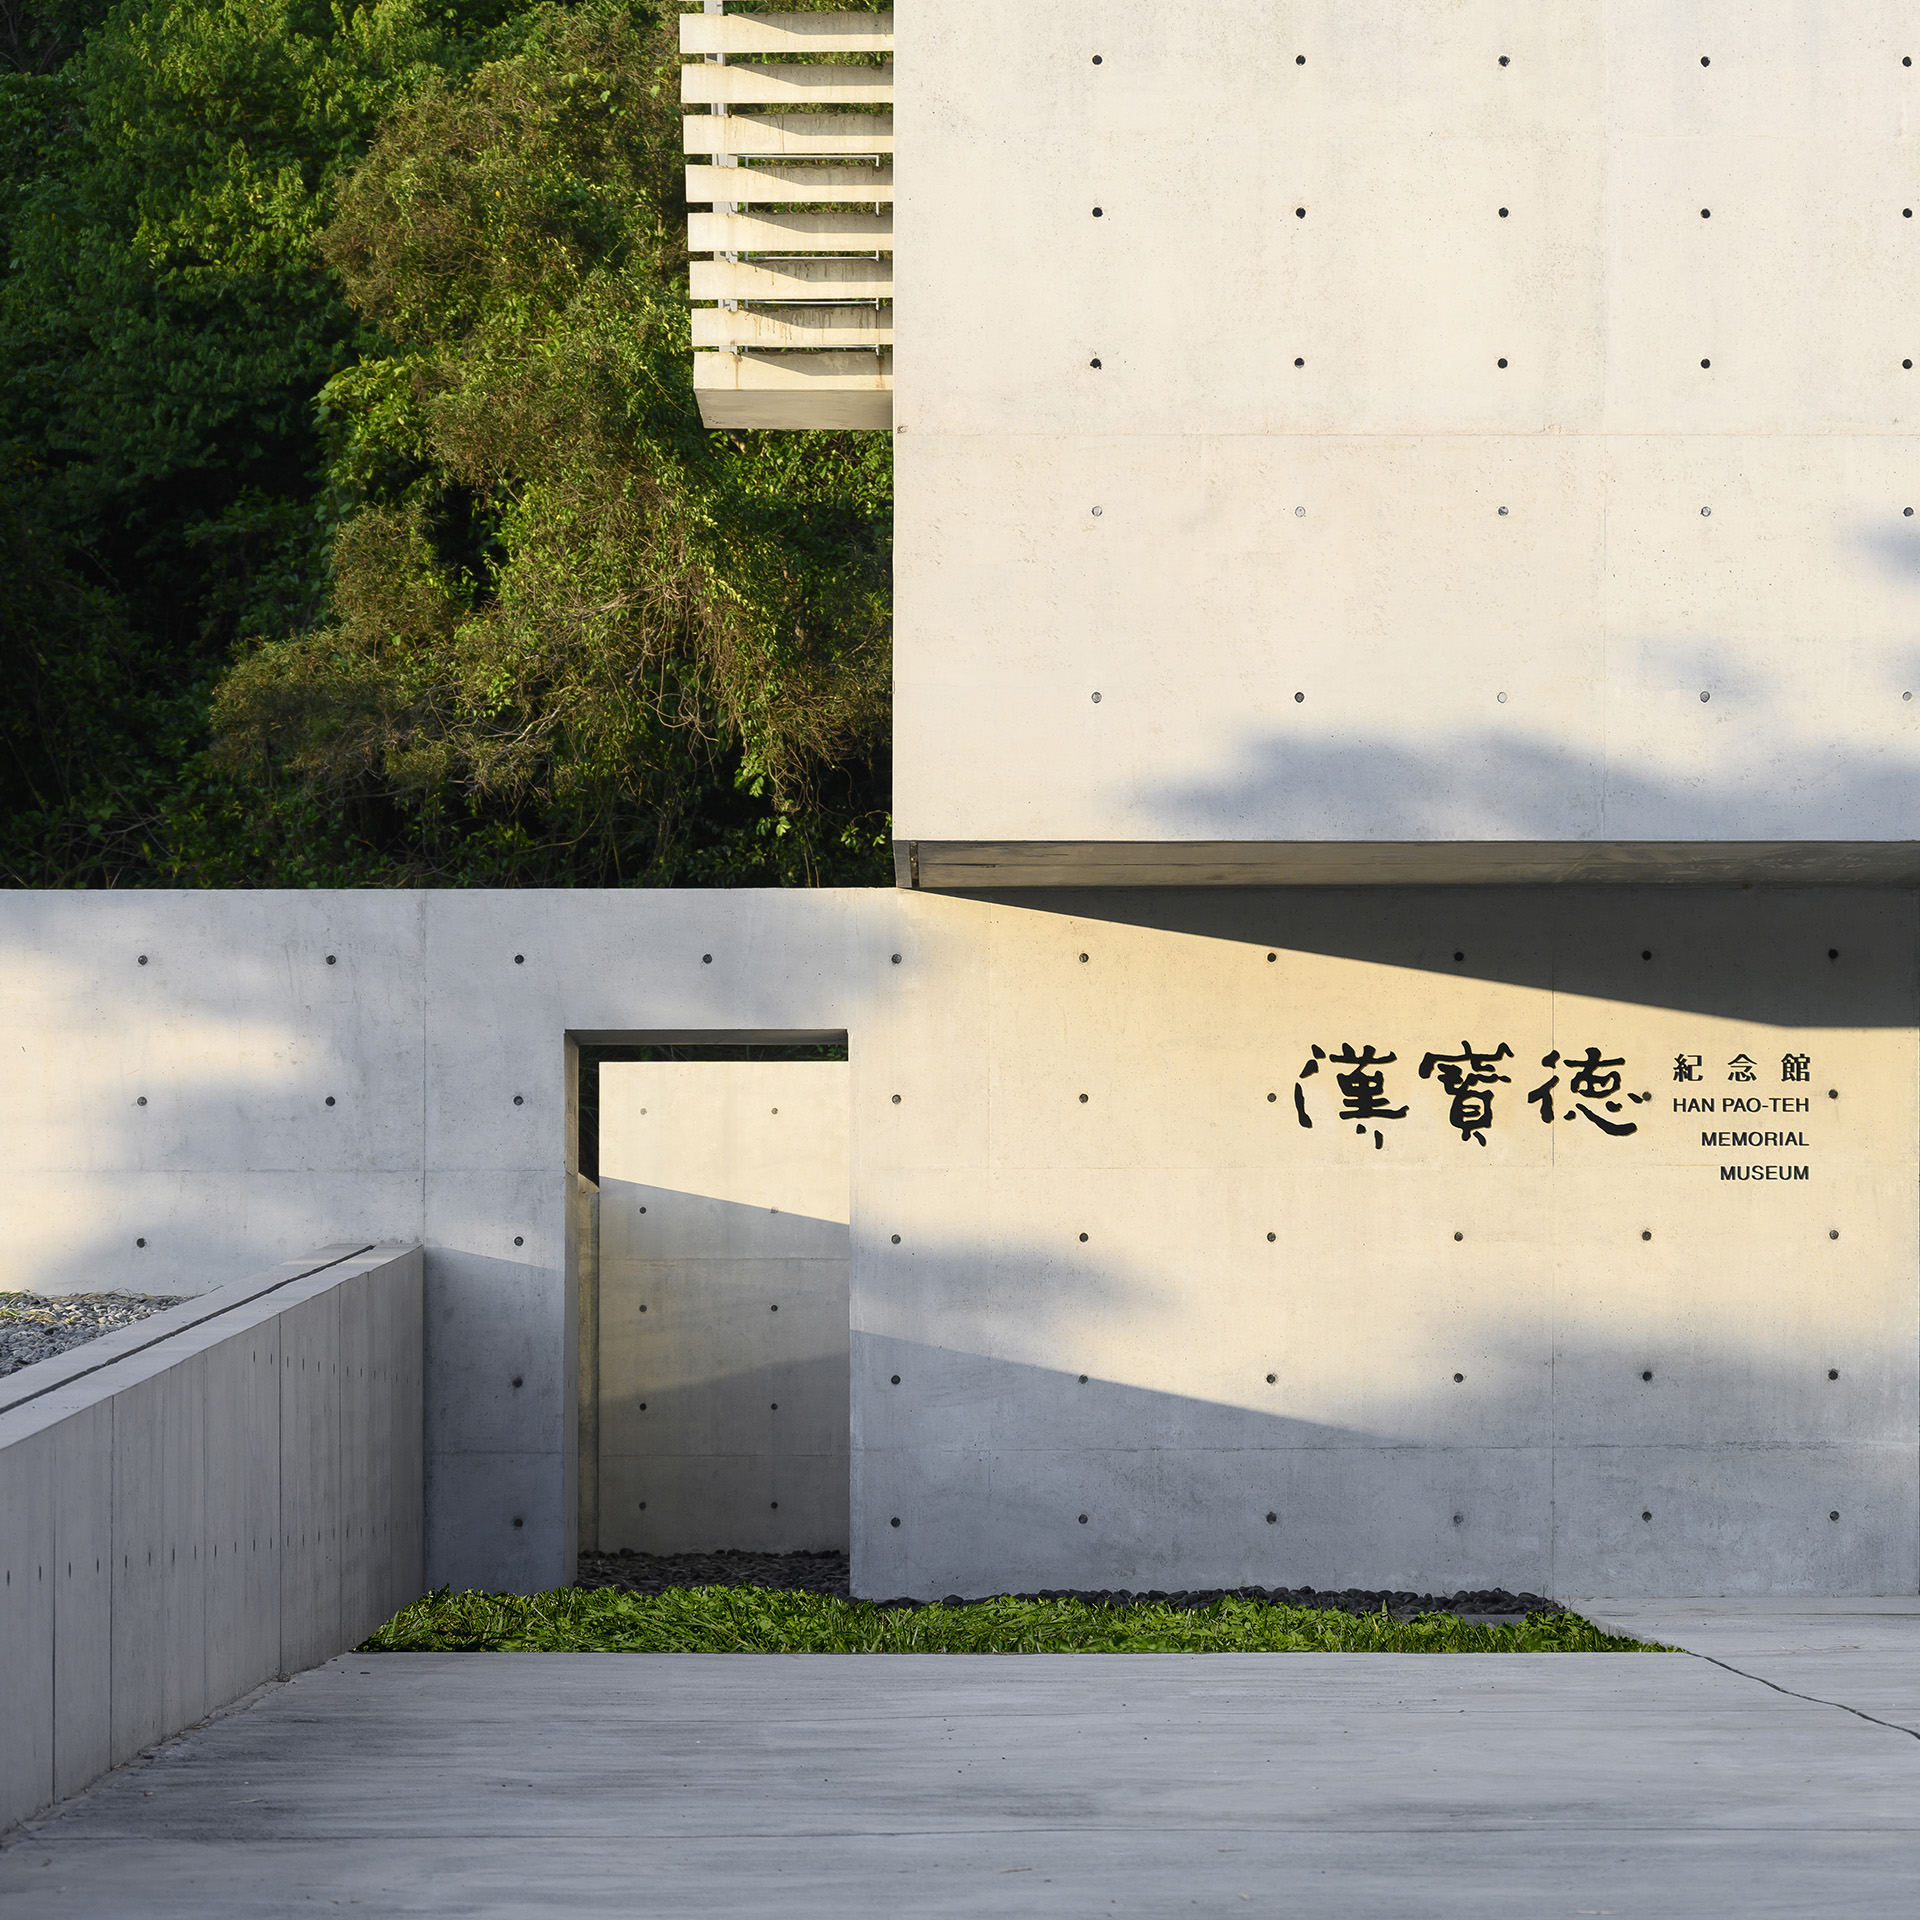 Han Pao-Teh Memorial Museum shortlisted in the Taiwan Architecture Award